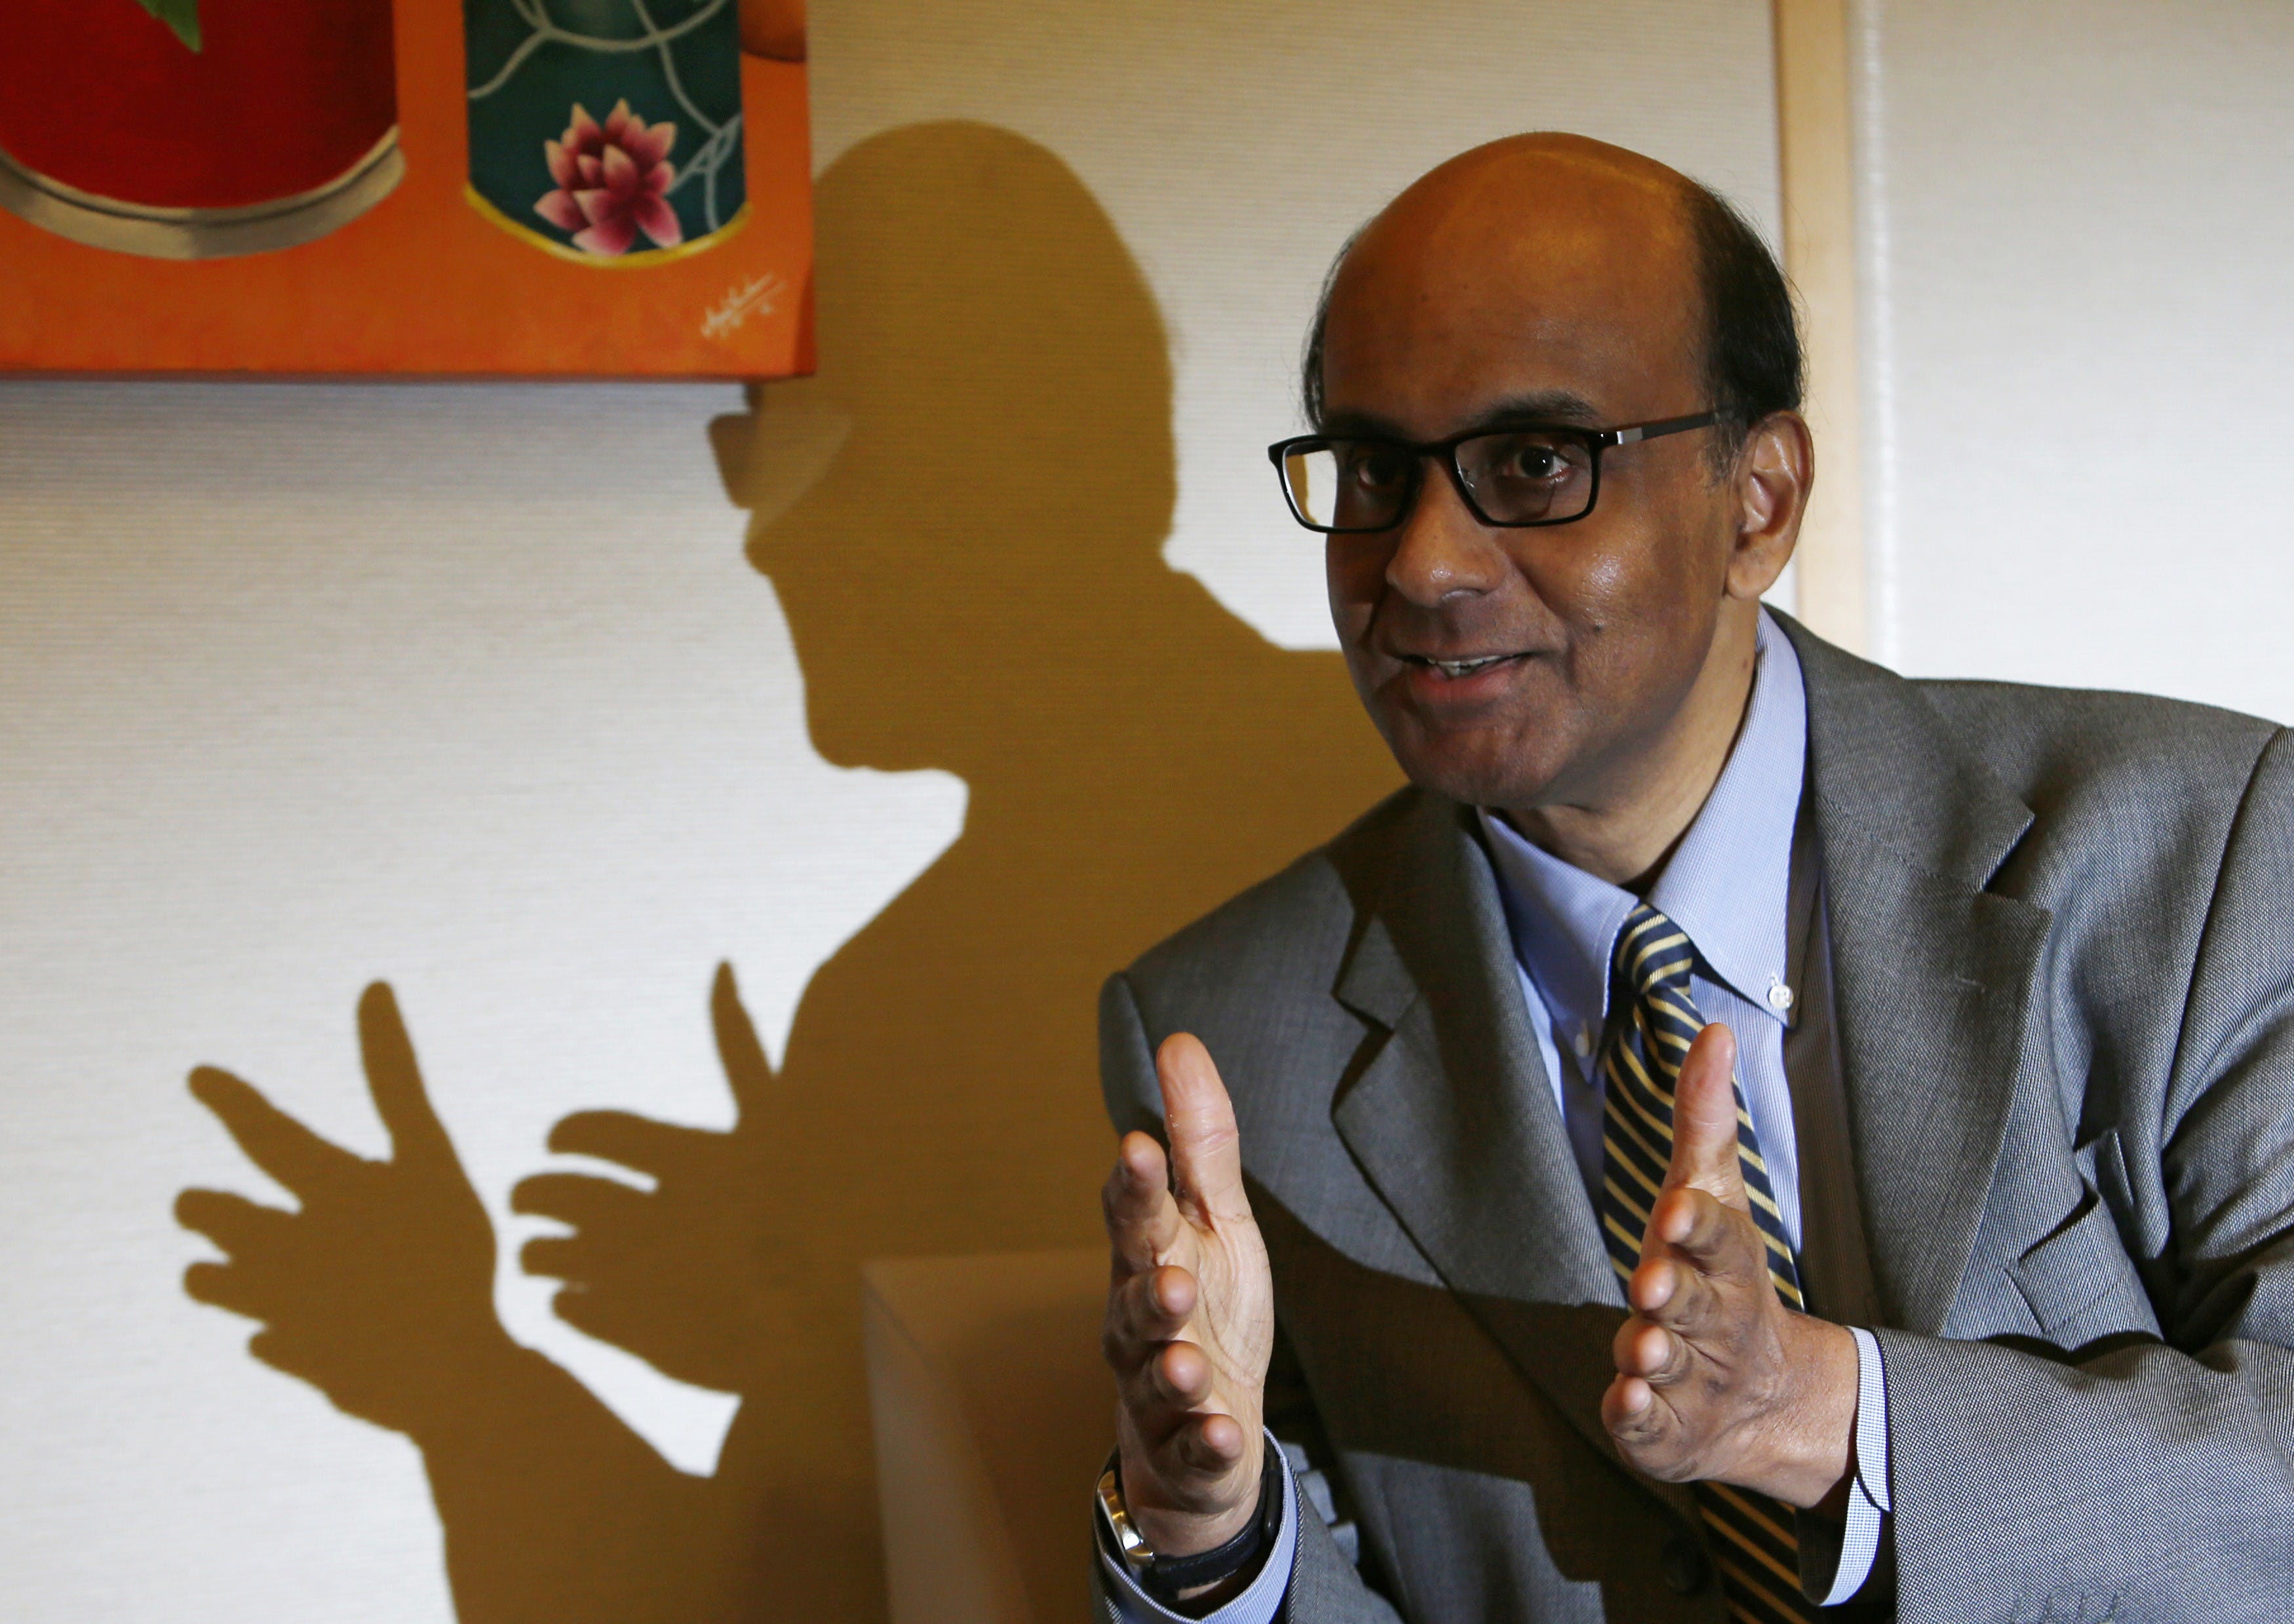 Singapore's Finance and Deputy Prime Minister Tharman speaks to Reuters during an interview at his office in Singapore